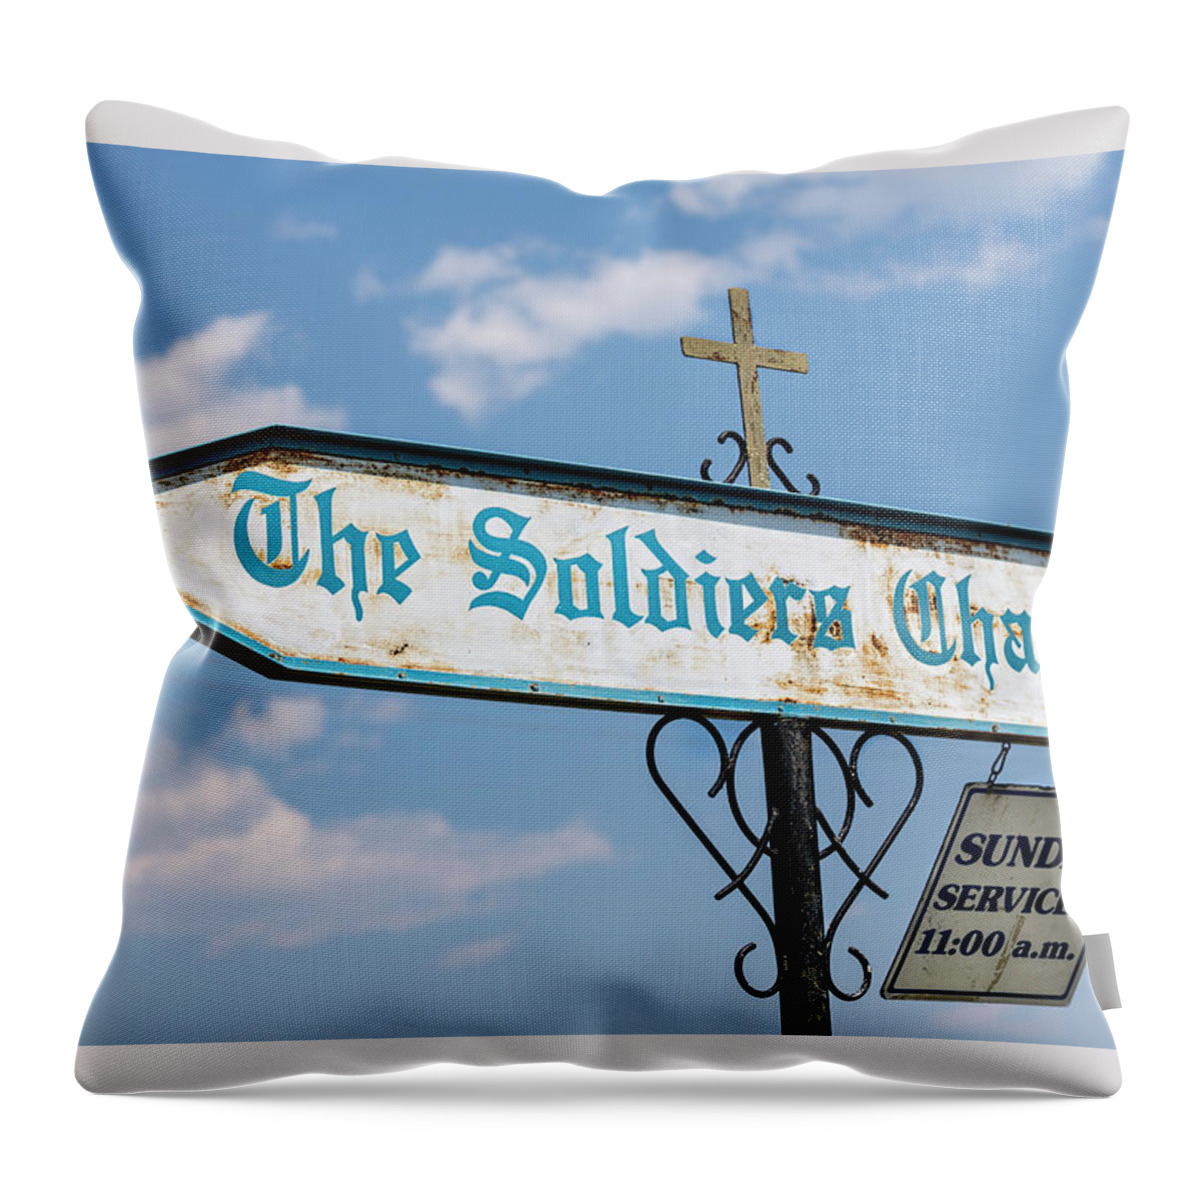 The Soldiers Chapel Throw Pillow featuring the photograph The Soldiers Chapel Sign by Mark Harrington